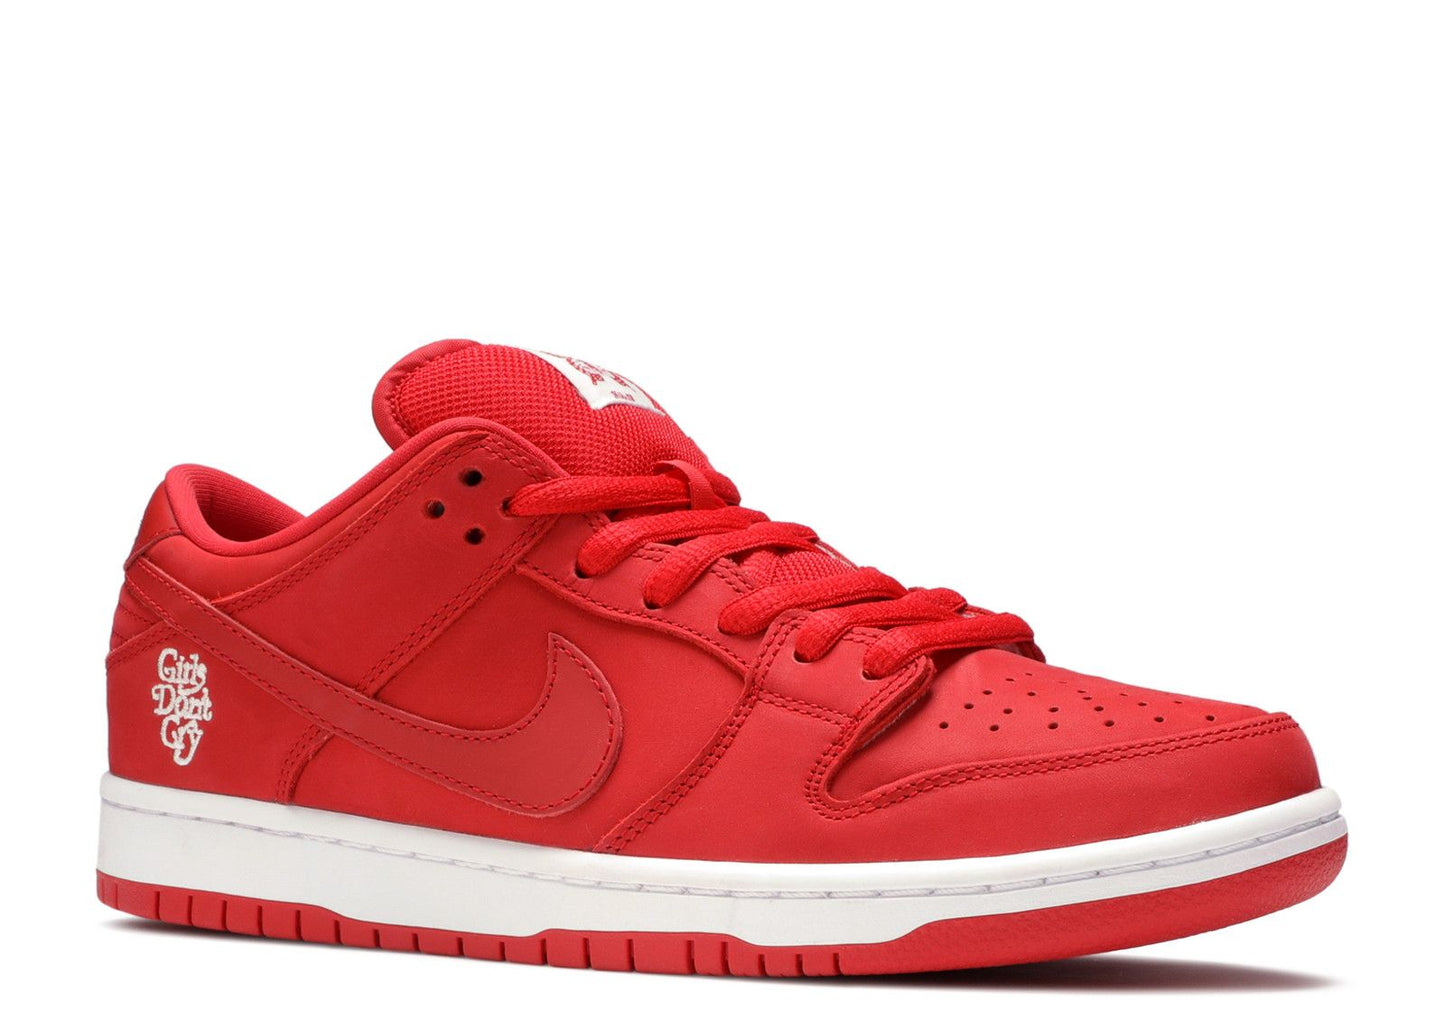 Girls Don't Cry x Nike SB Dunk Low Pro QS "Coming Back Home"